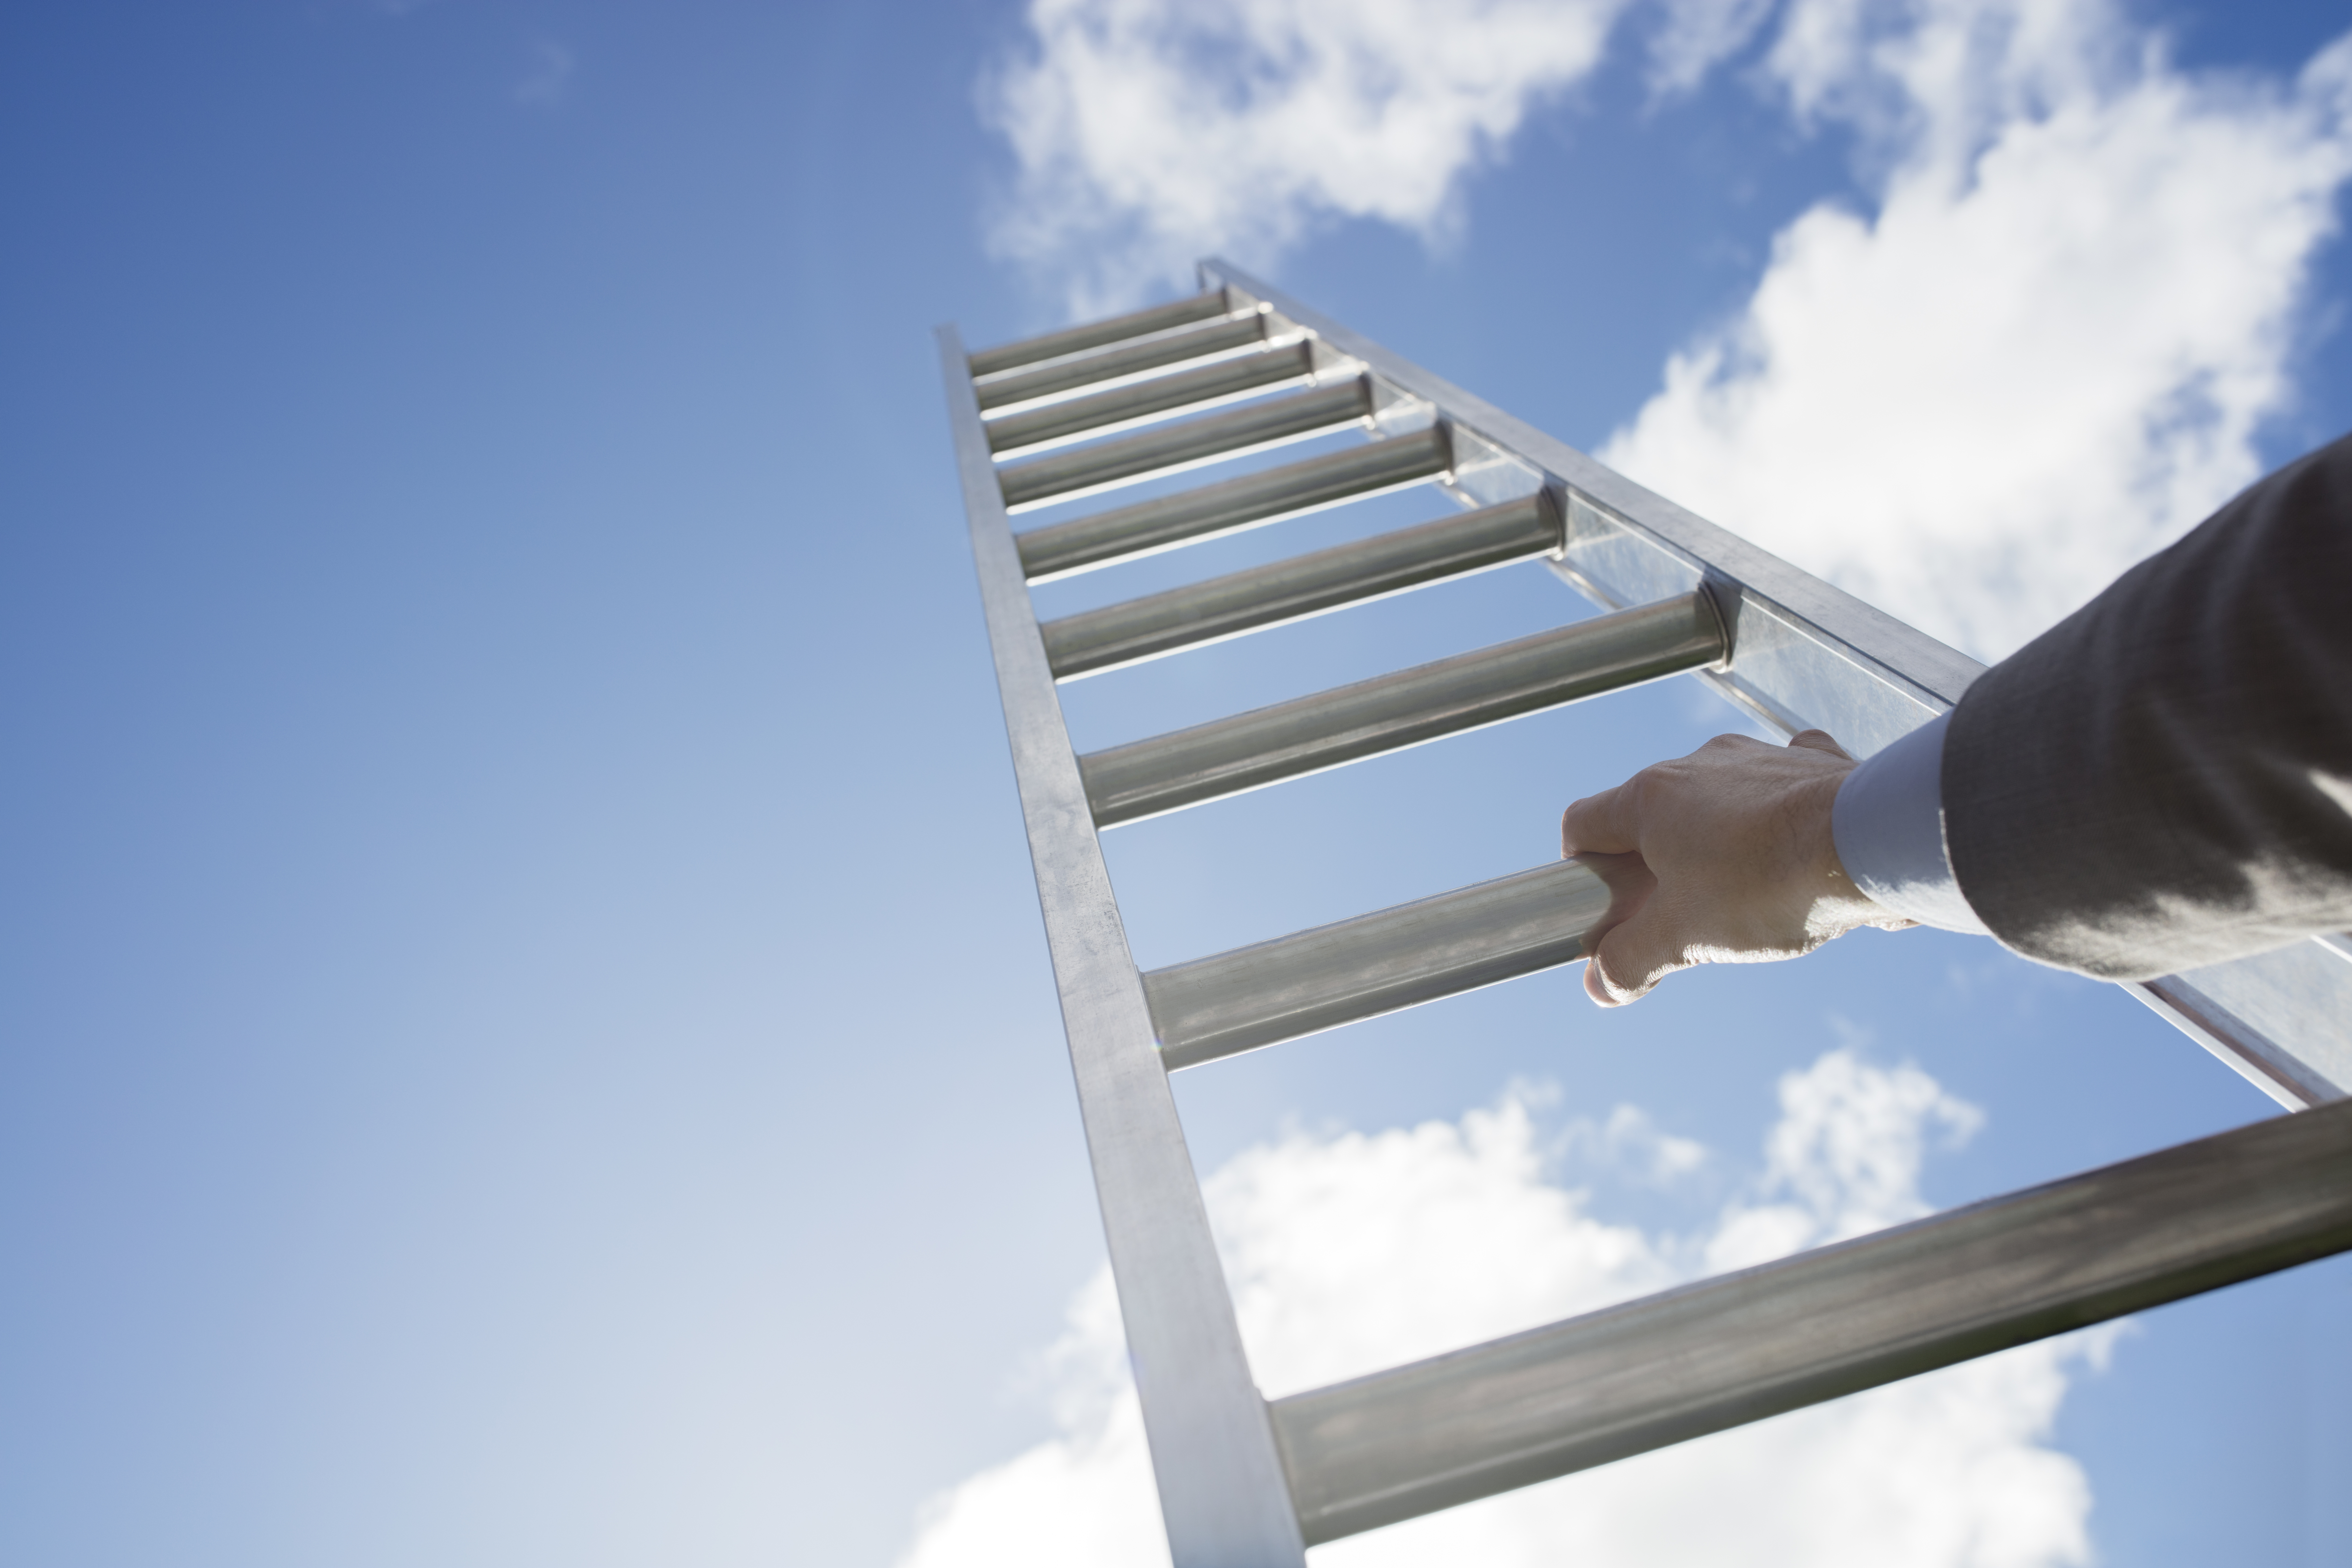 Fight your way to the top and leave a ladder behind for others to use